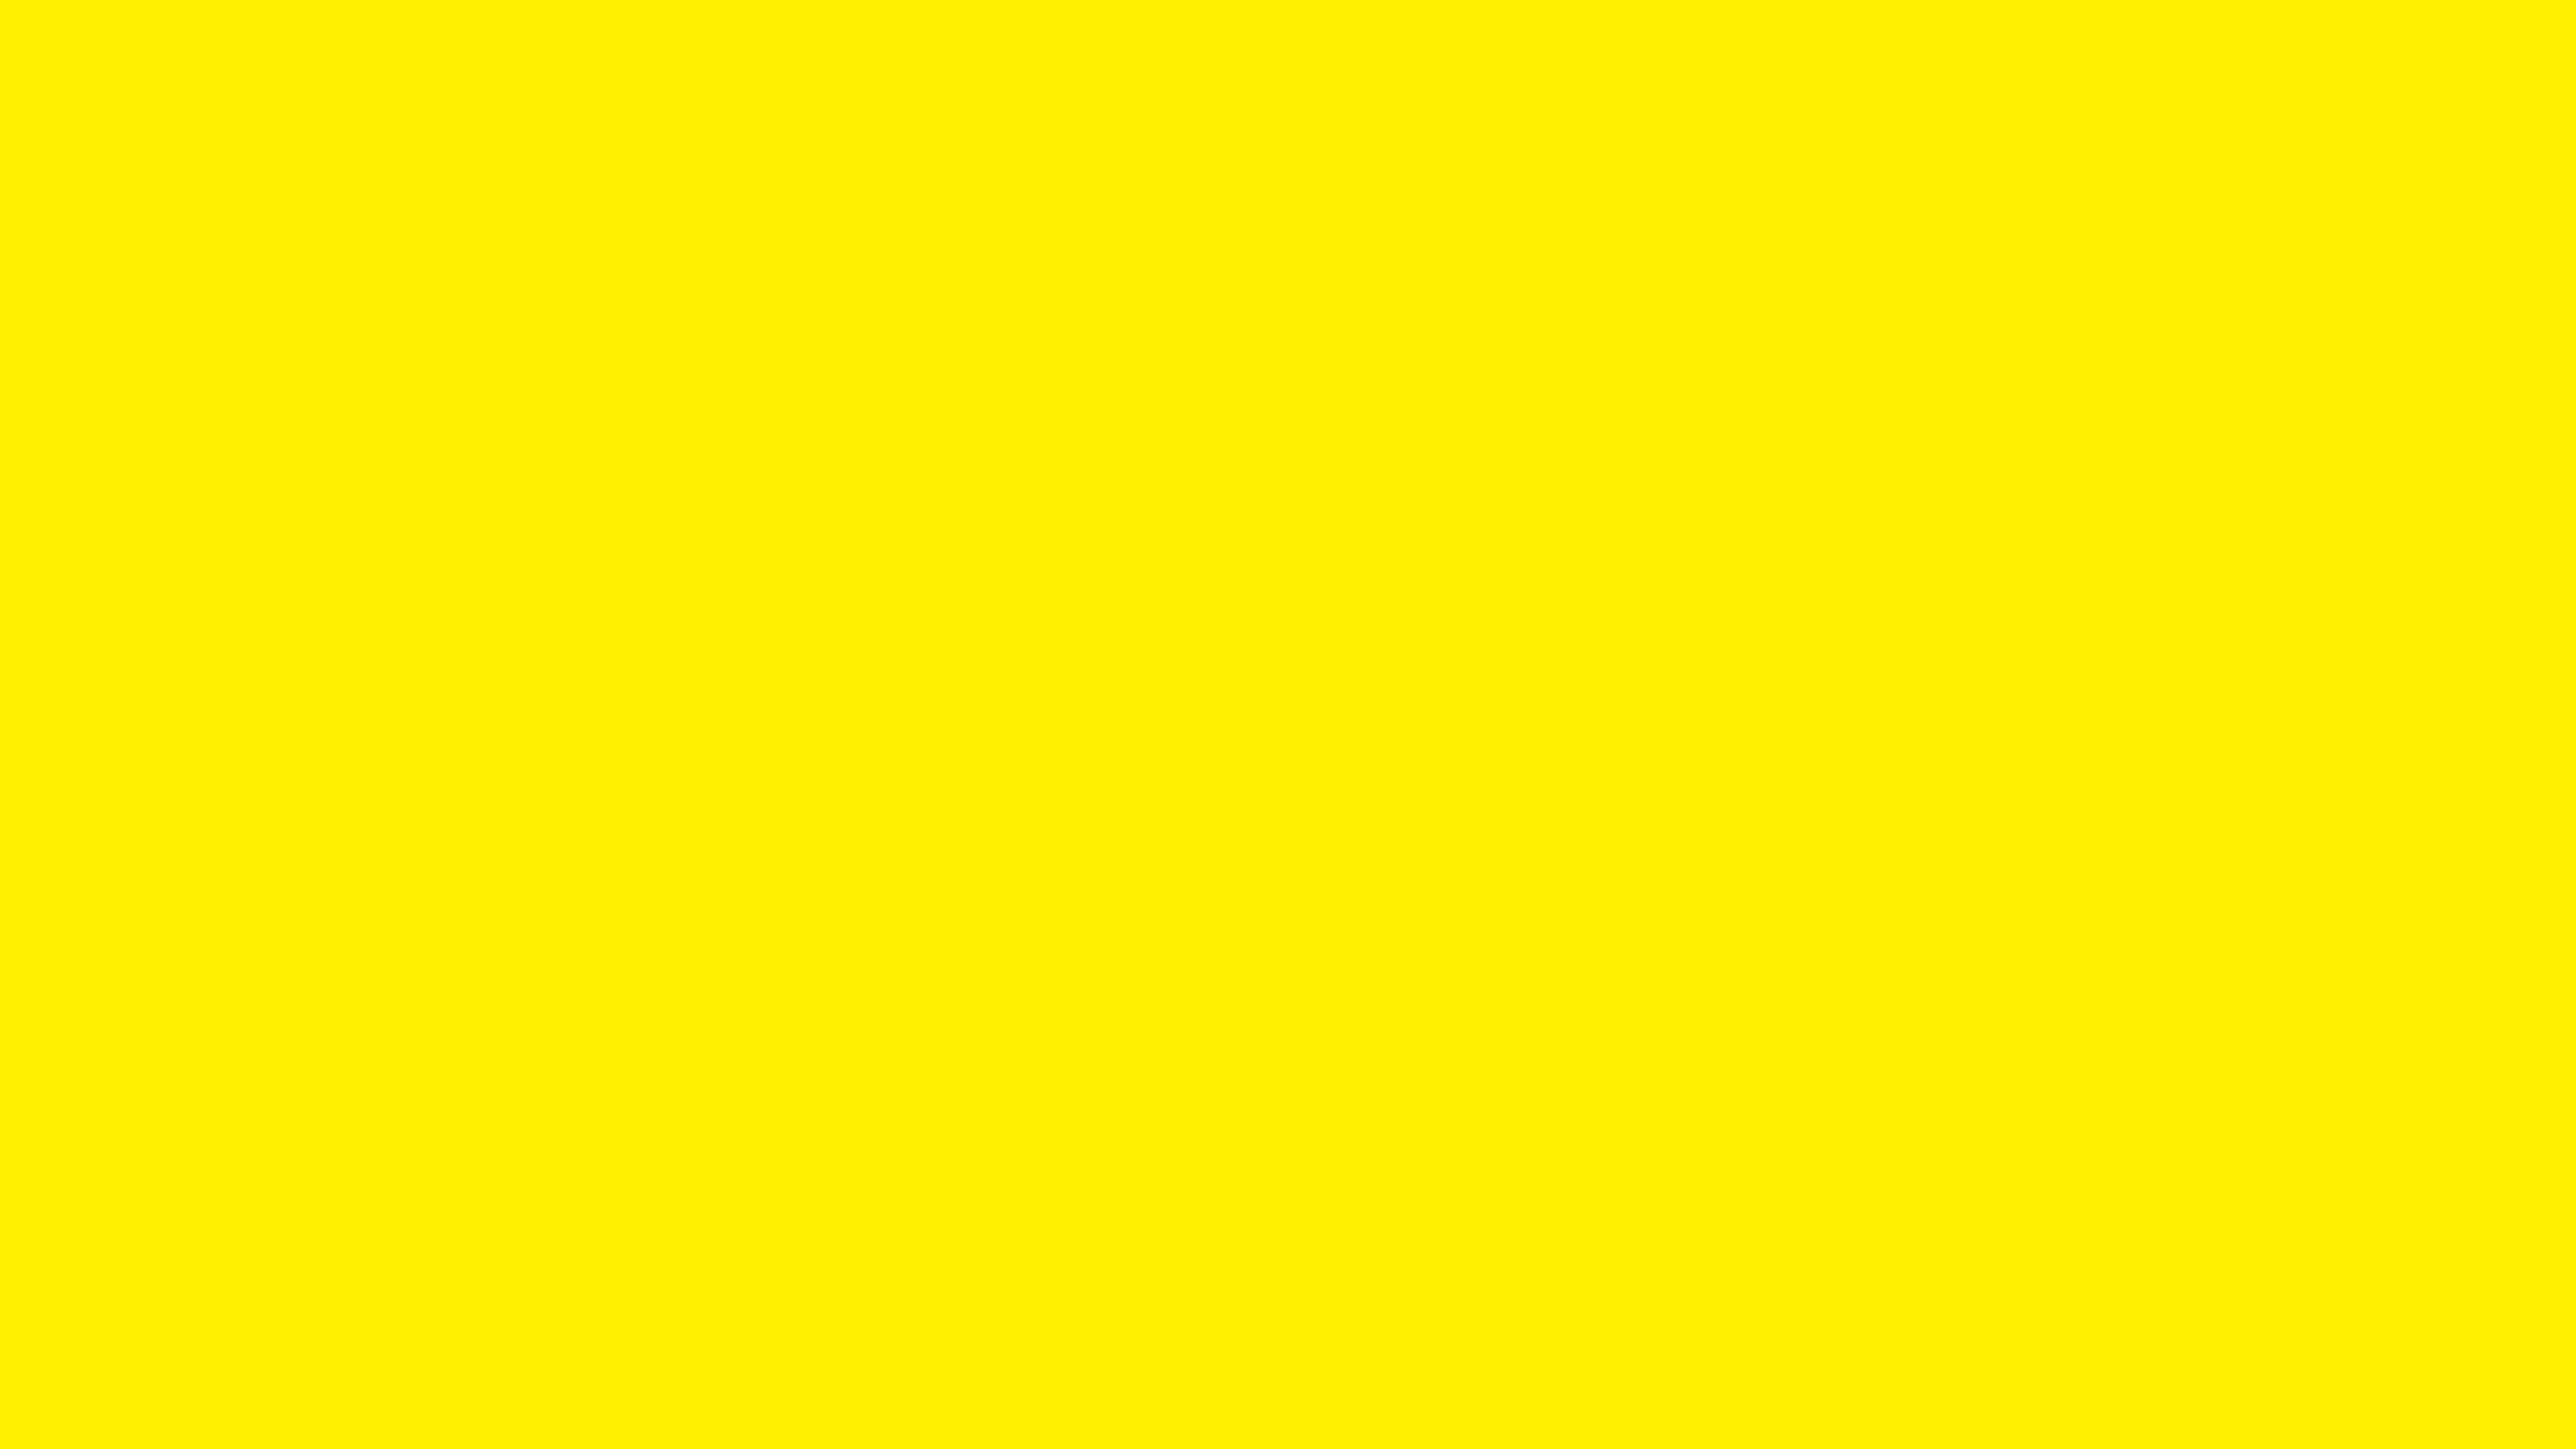 7680x4320 Canary Yellow Solid Color Background